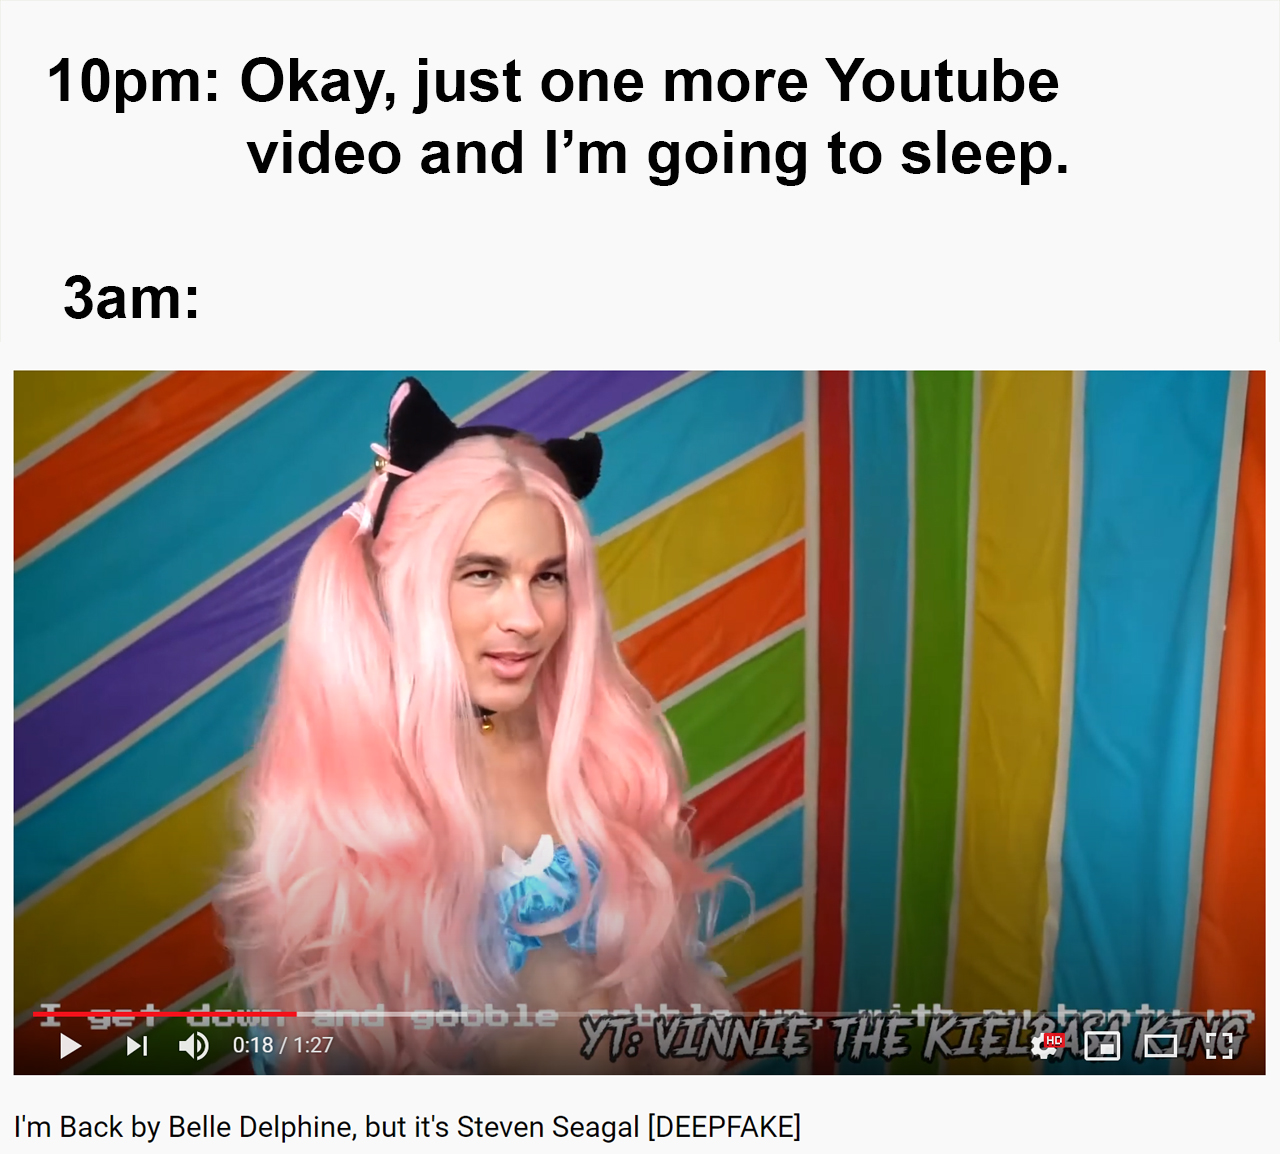 media - 10pm Okay, just one more Youtube video and I'm going to sleep. 3am I get do D 1.27 sobble Vnnie THERIg cch I'm Back by Belle Delphine, but it's Steven Seagal Deepfake